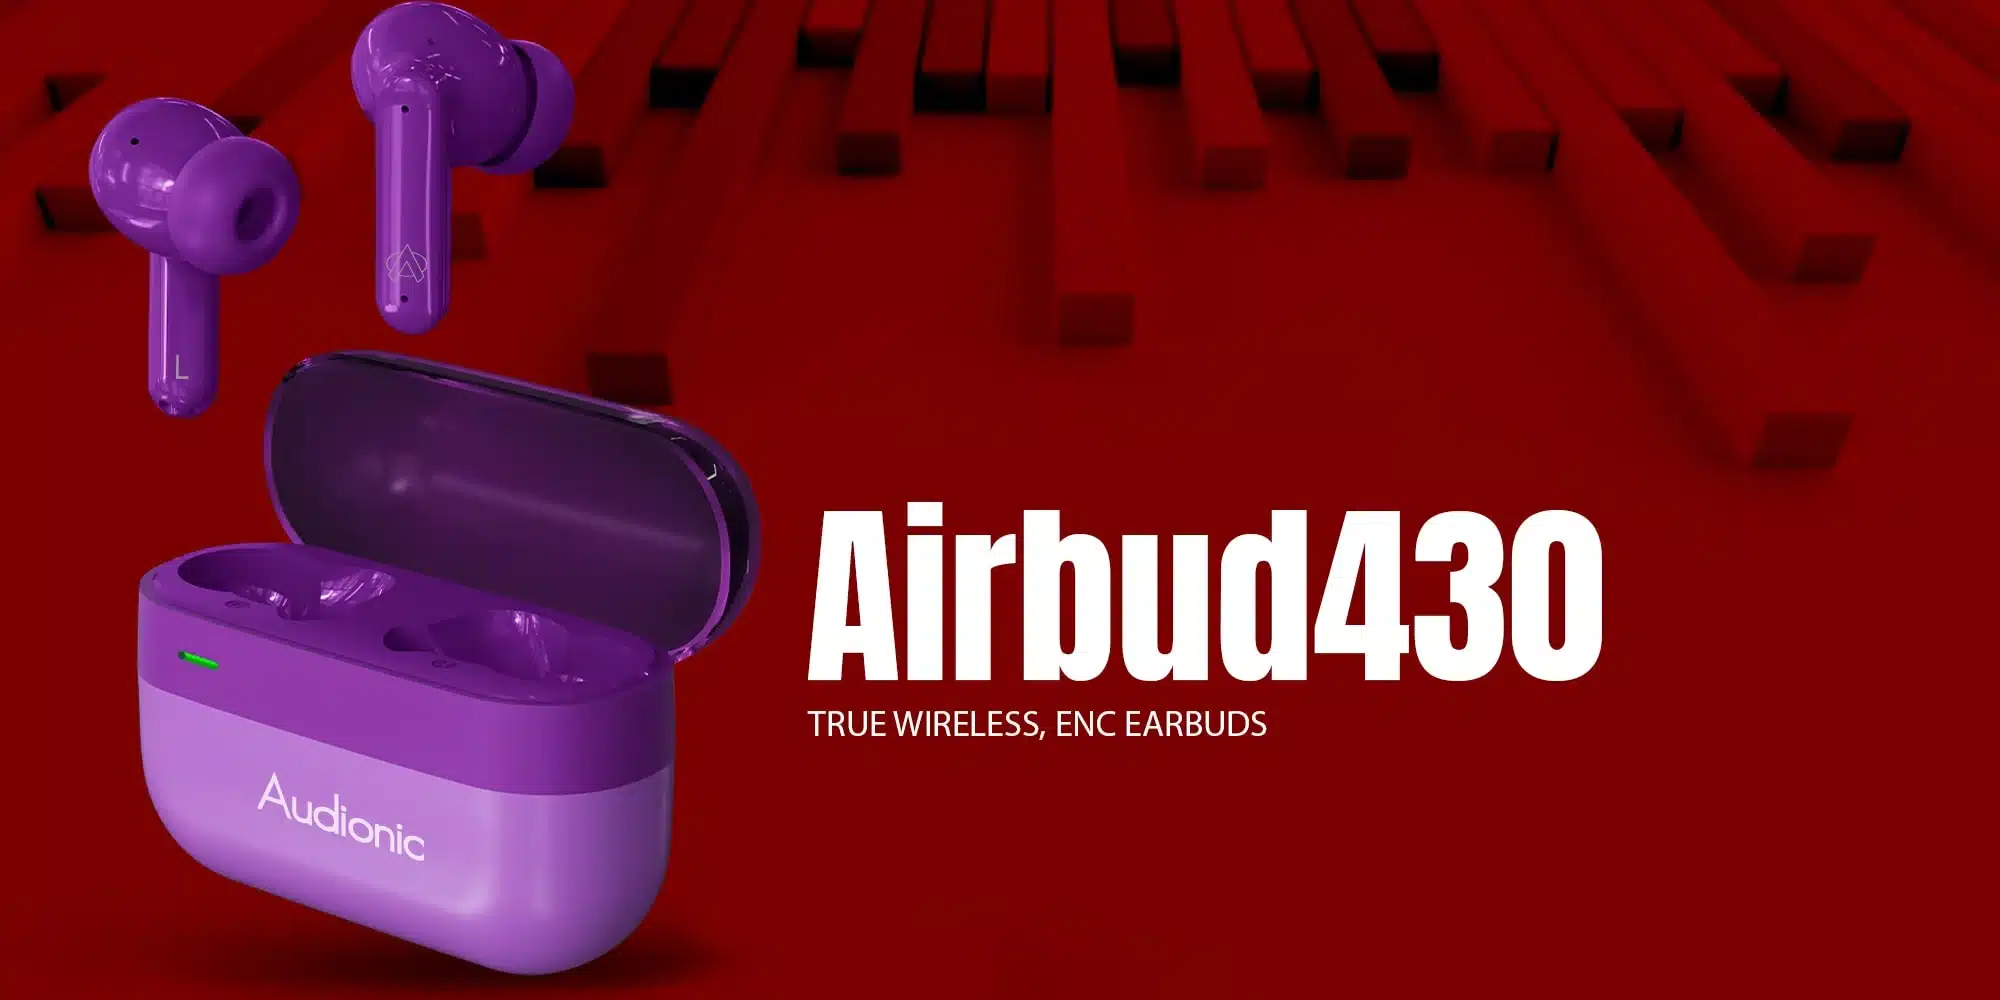 audionic-airbud-430-feature